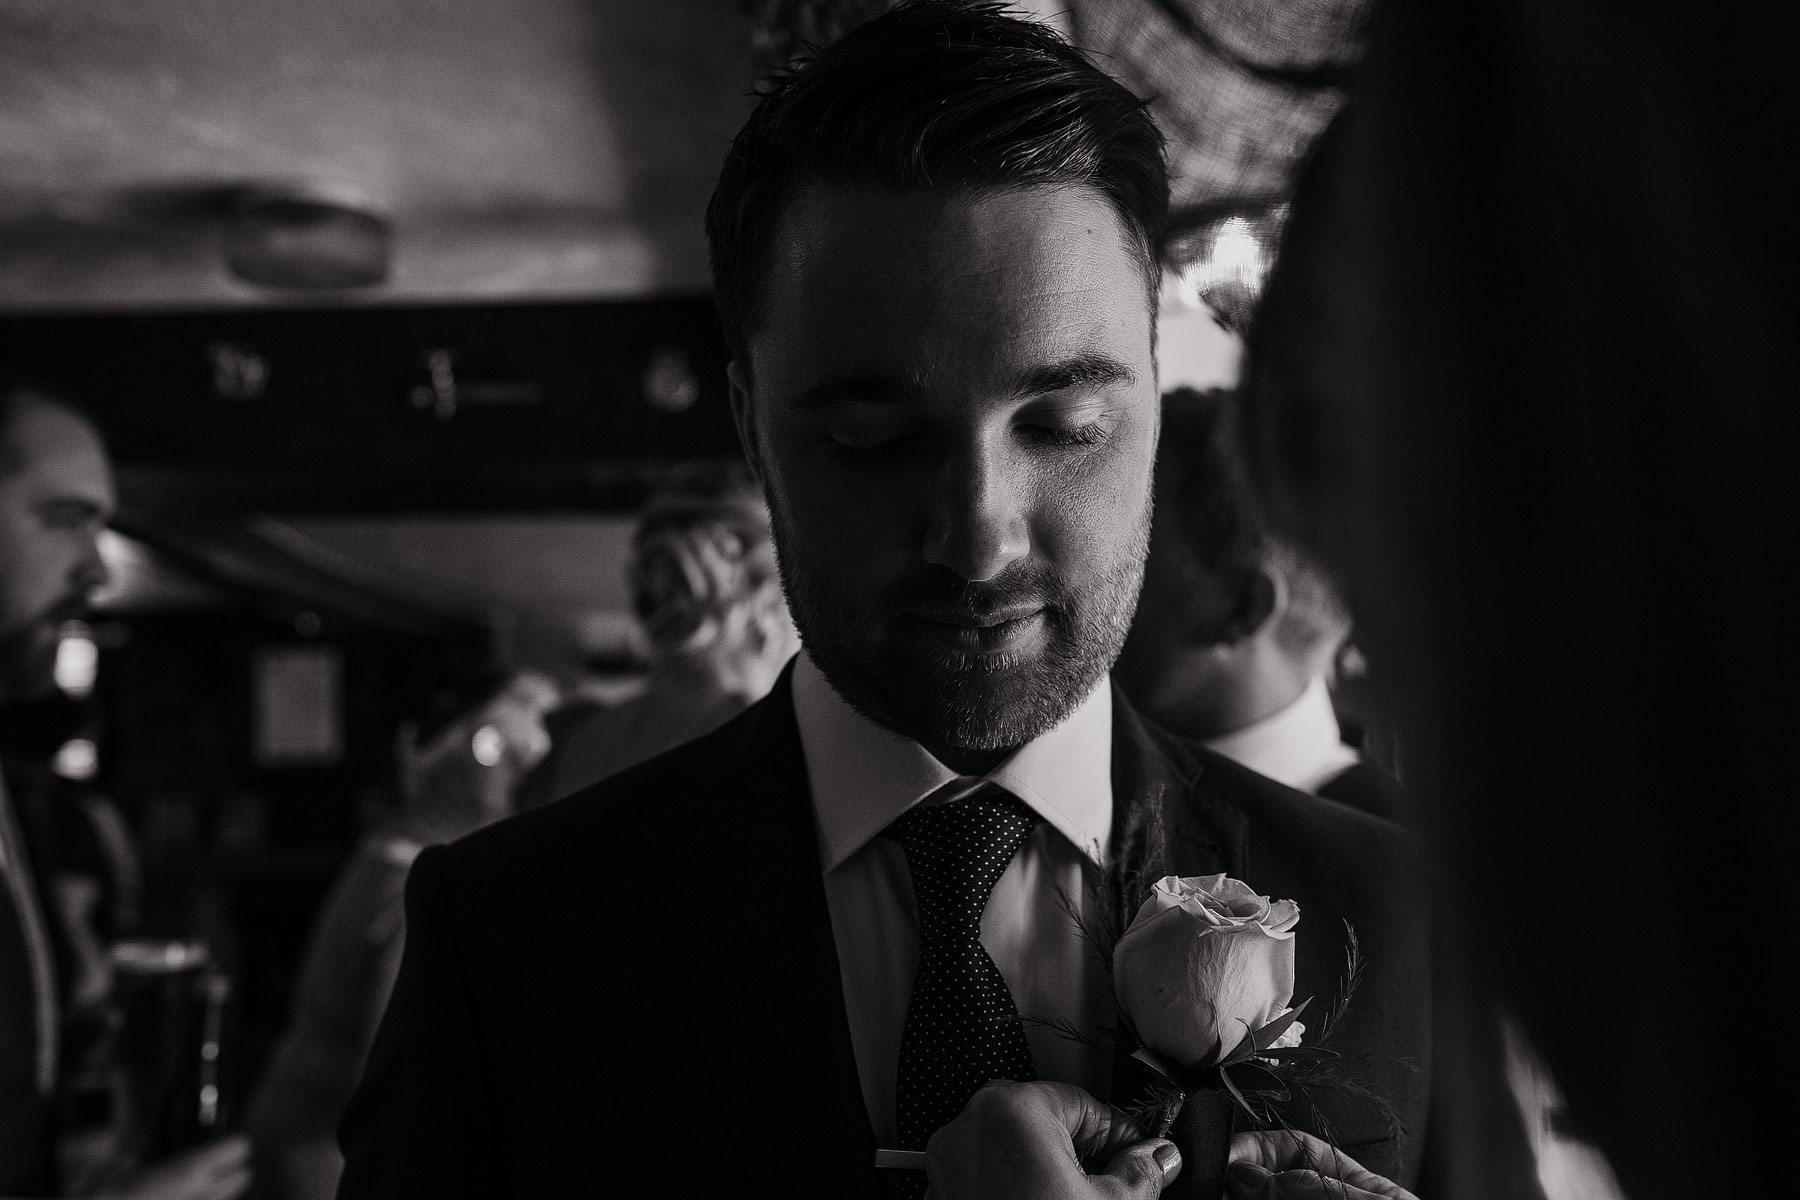 balck and white photograph of a groom havig his flower pinned to his jacket